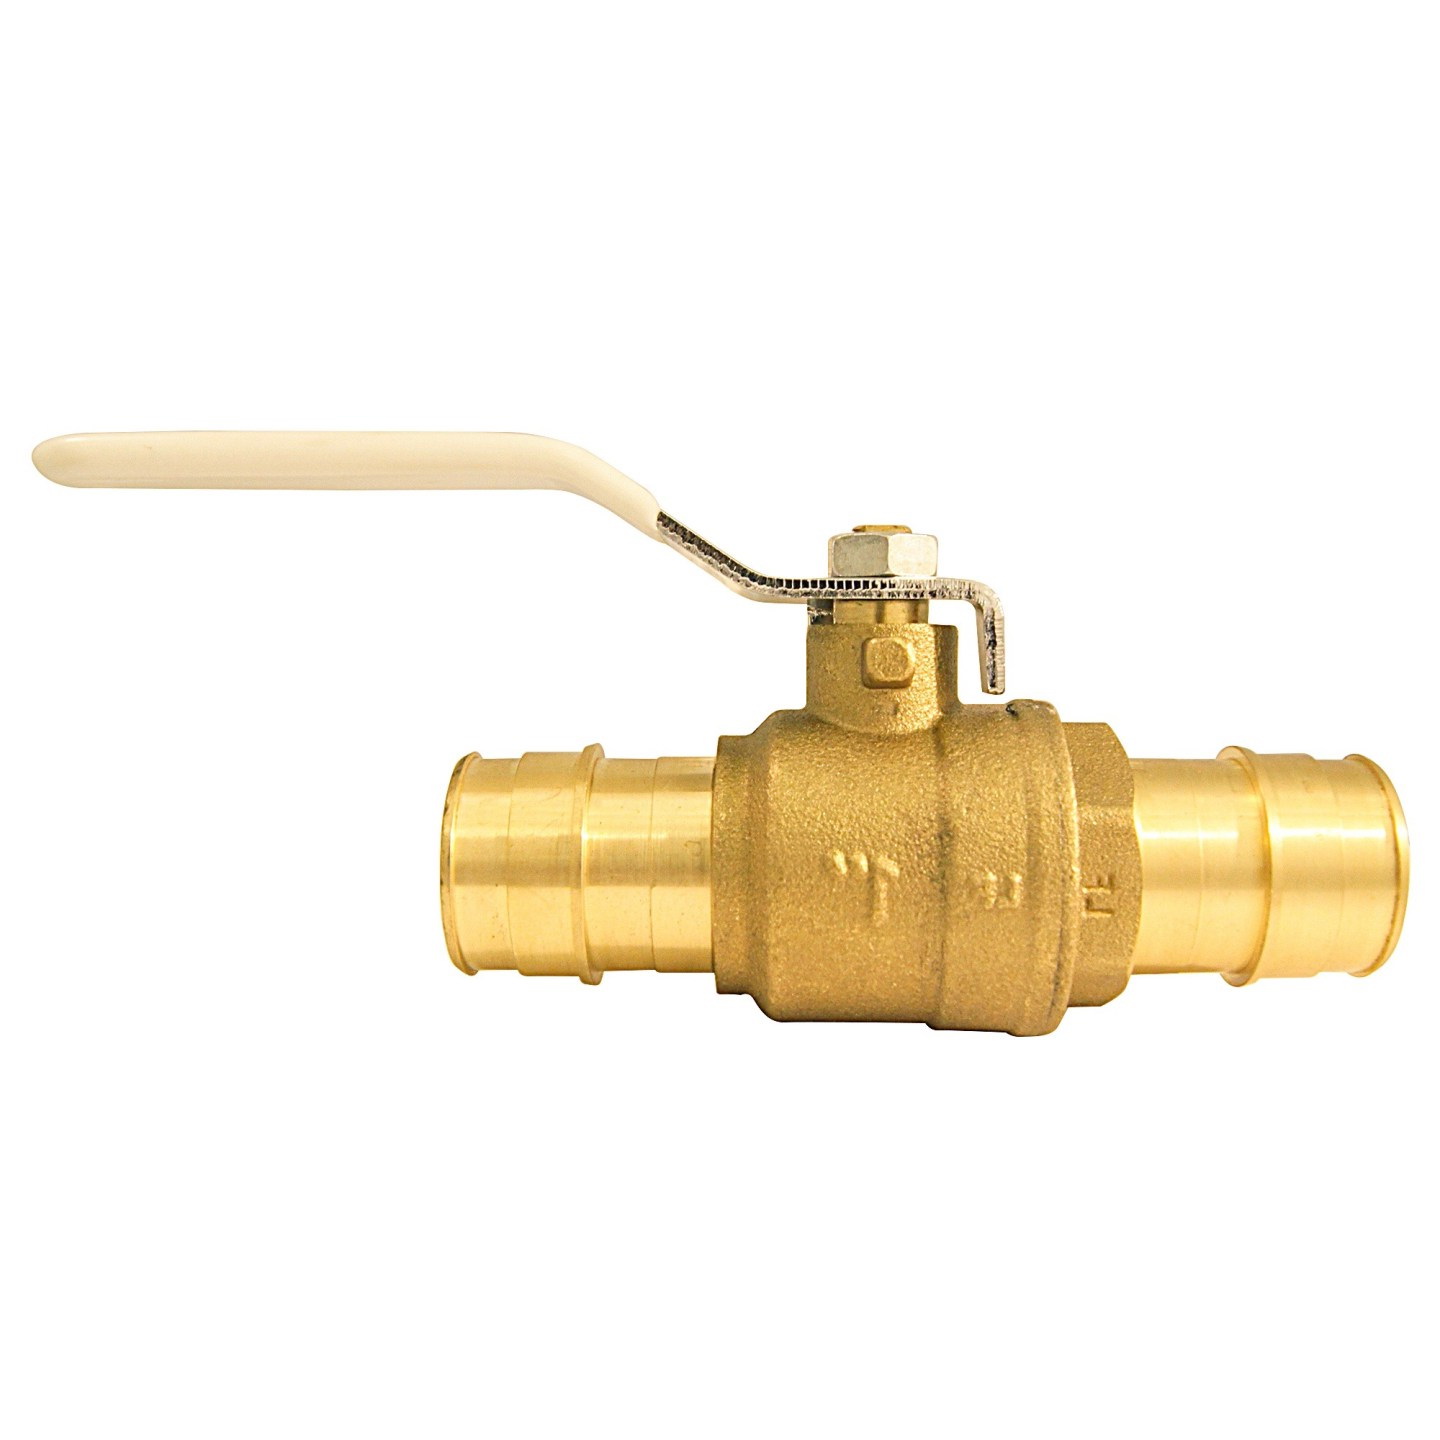 EPXV1 Ball Valve, 1 in Connection, Barb, 200 psi Pressure, Quarter-Turn Actuator, Brass Body